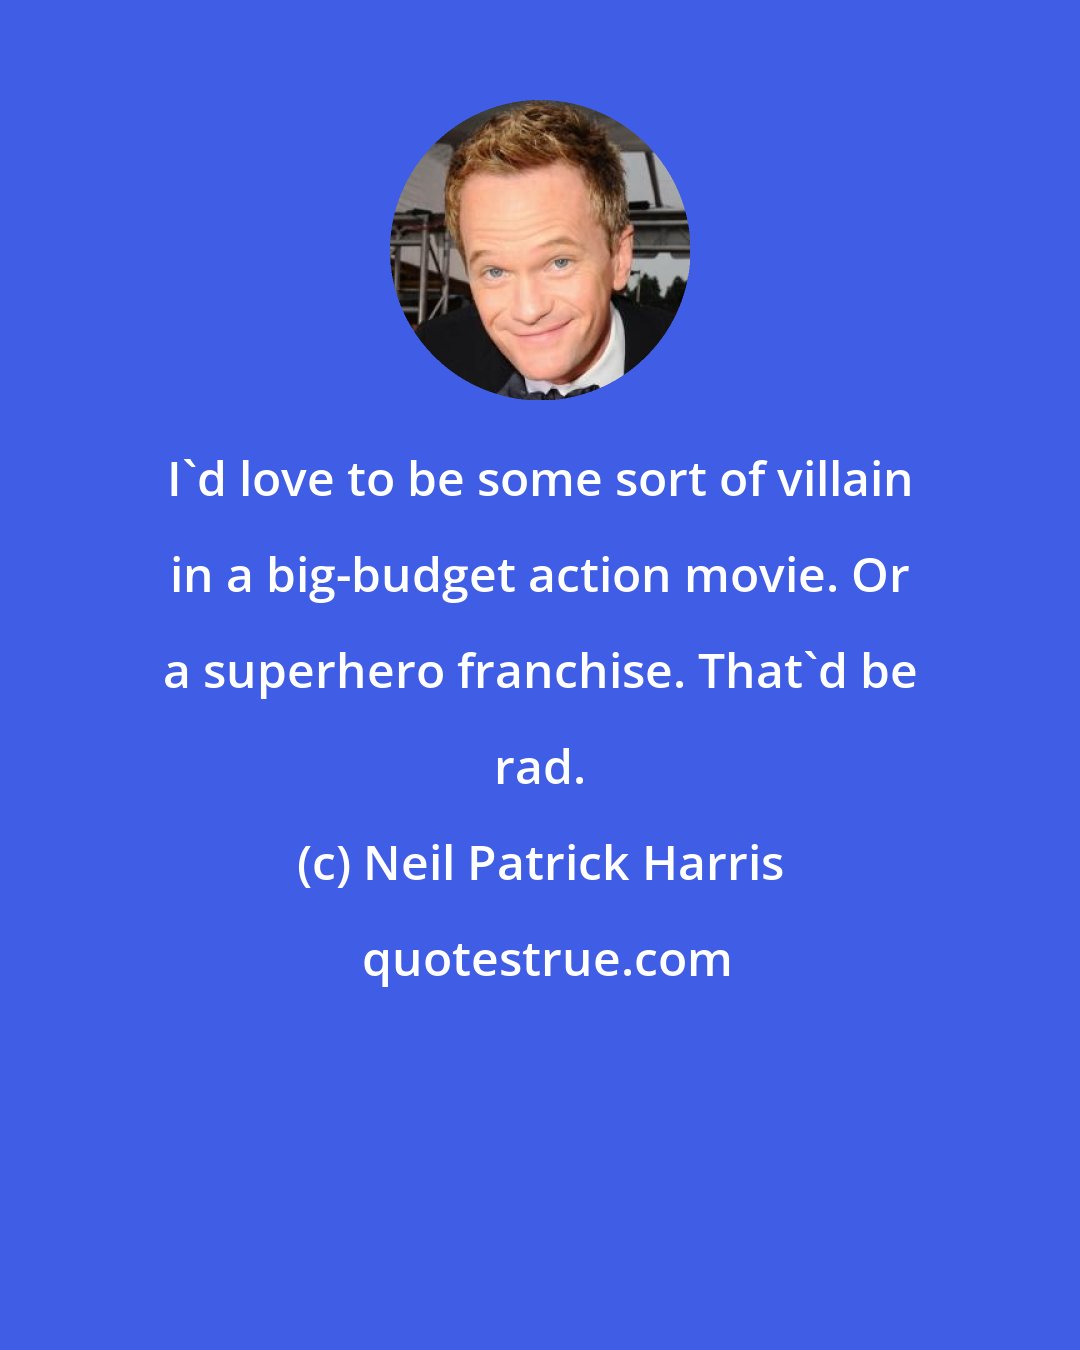 Neil Patrick Harris: I'd love to be some sort of villain in a big-budget action movie. Or a superhero franchise. That'd be rad.